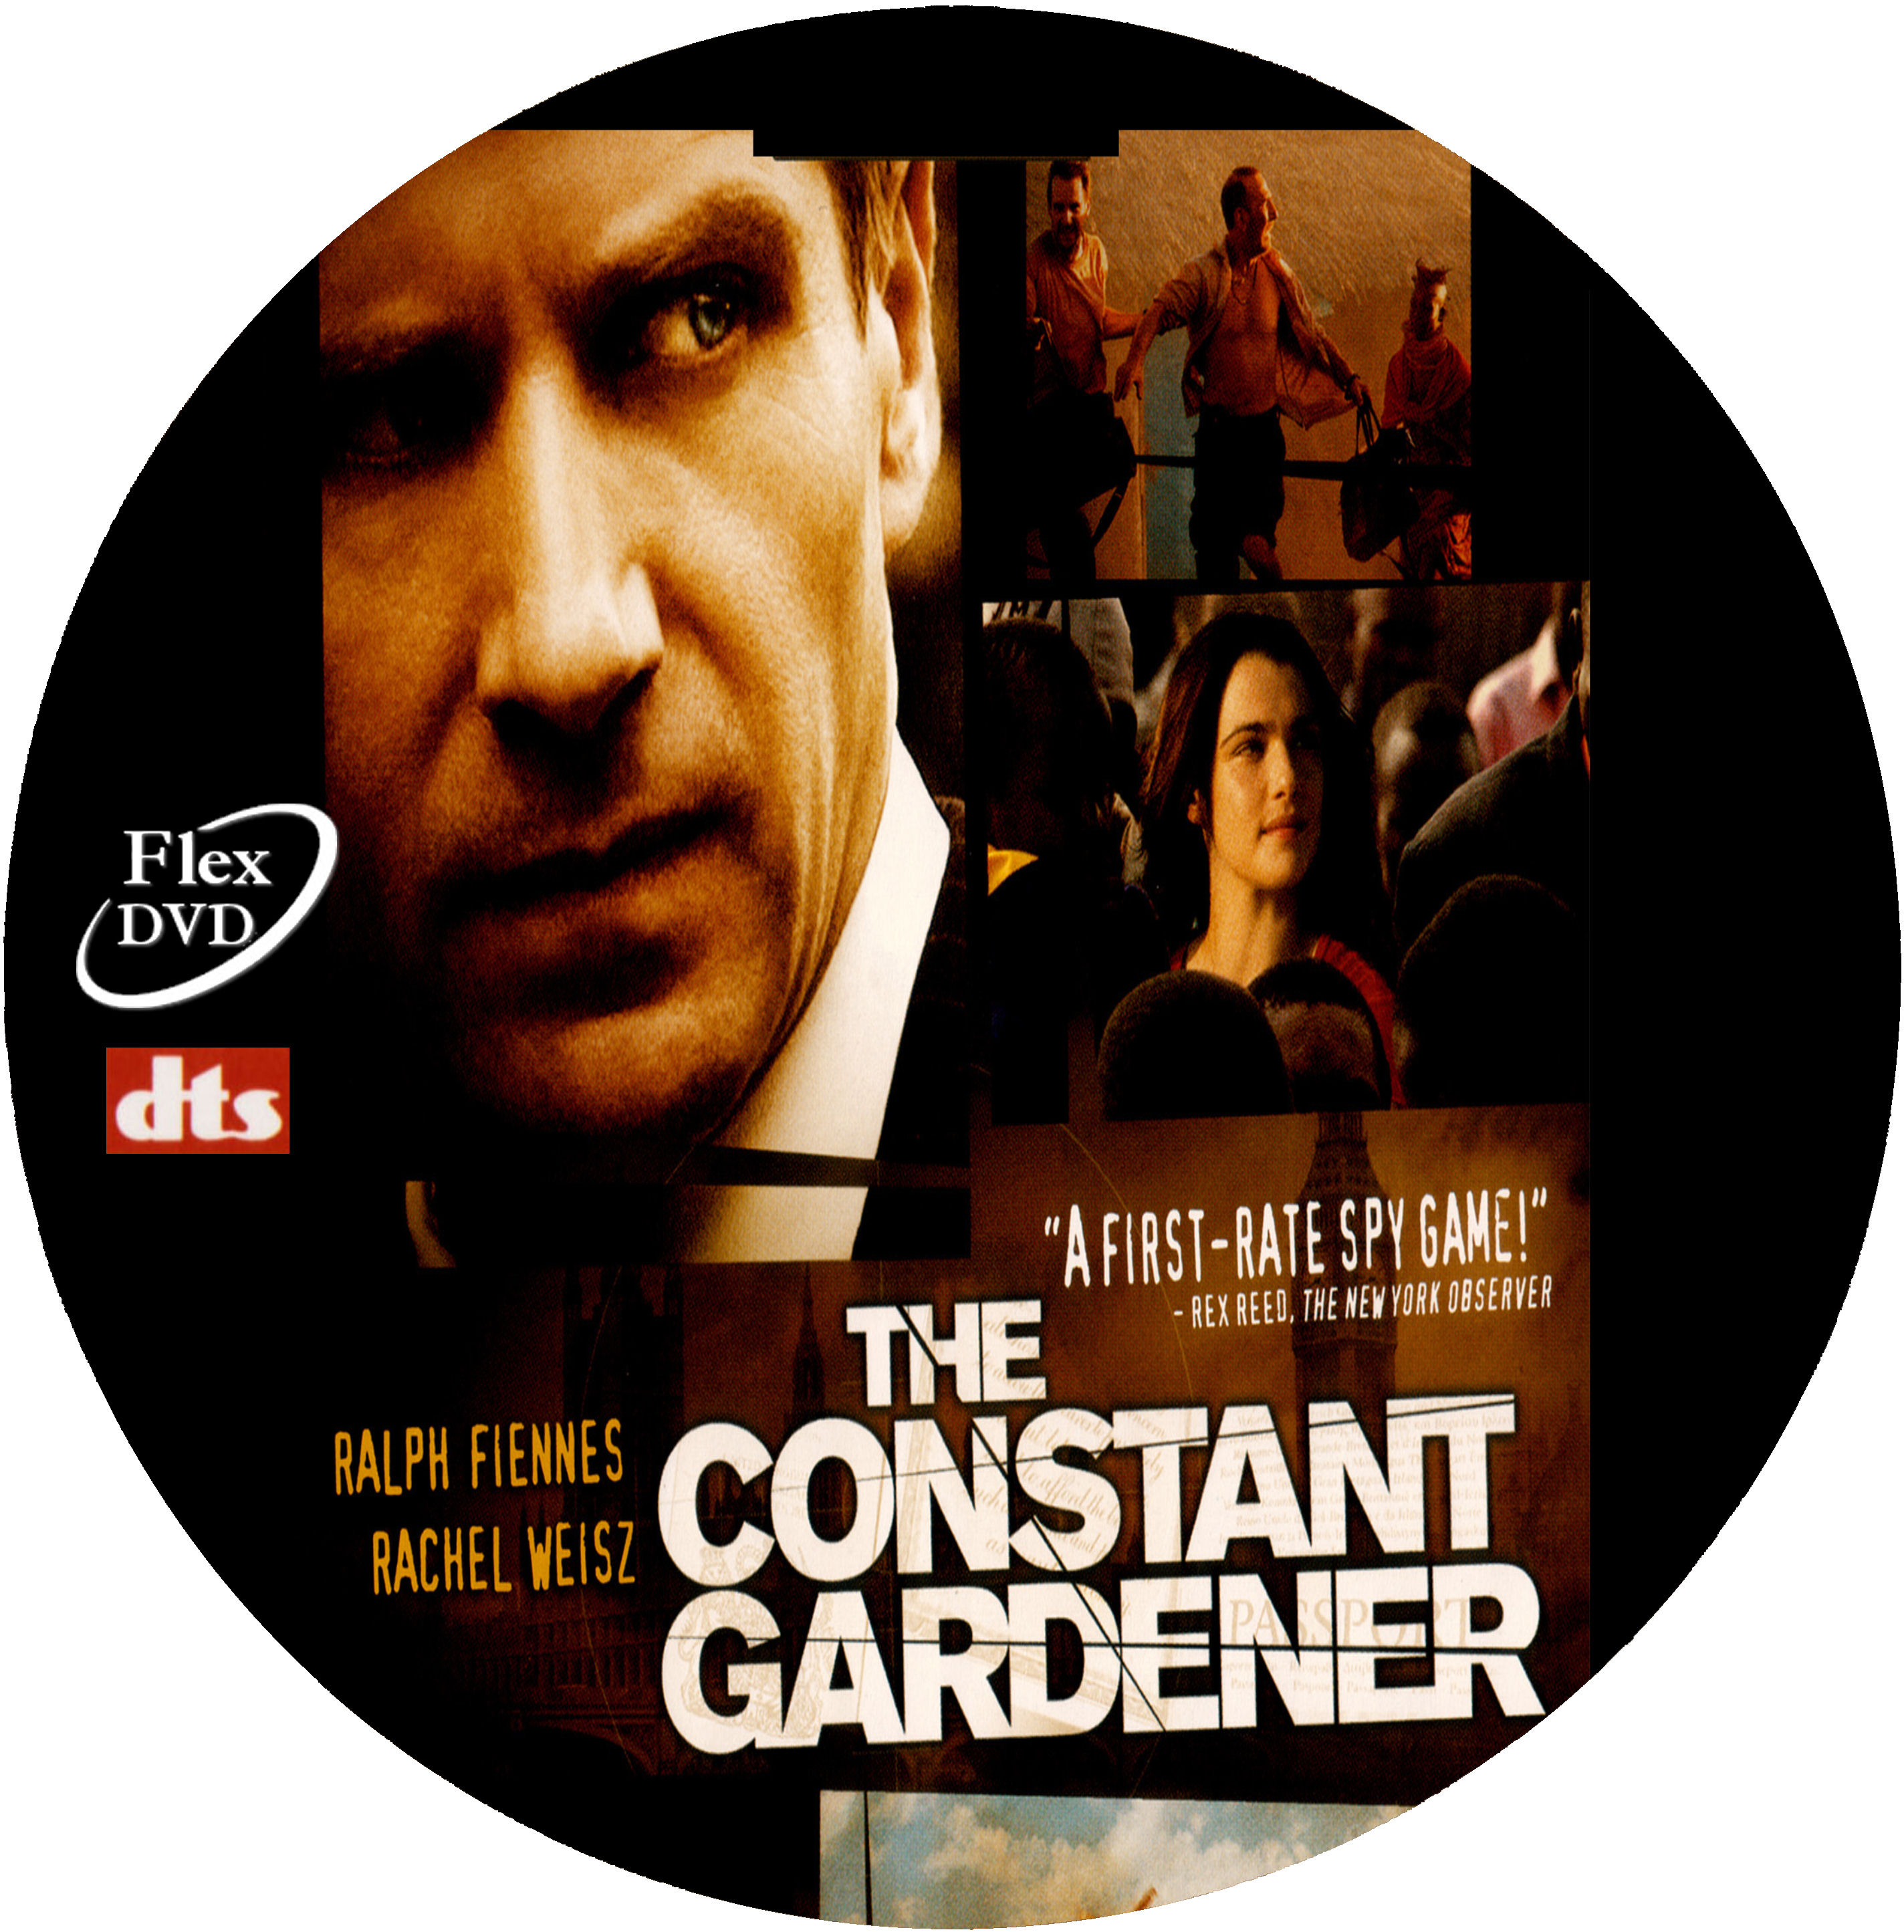 Covers Box Sk Constant Gardener The 2005 High Quality Dvd